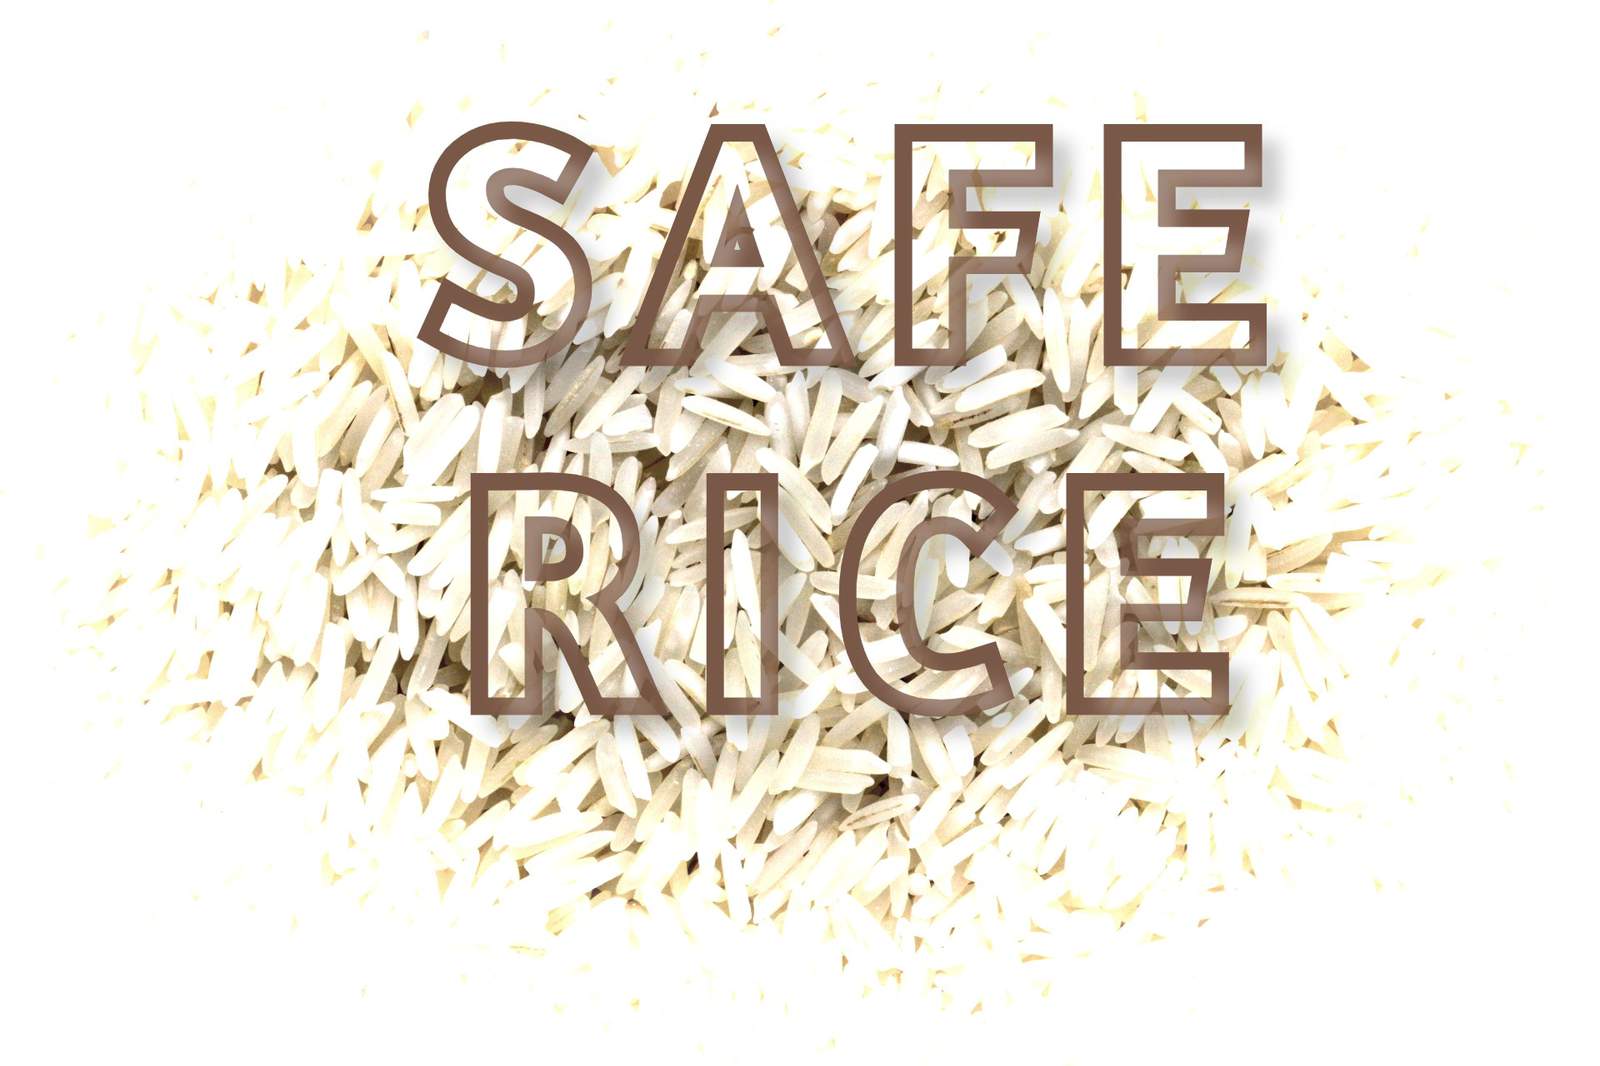 Arsenic in rice can cause cancer